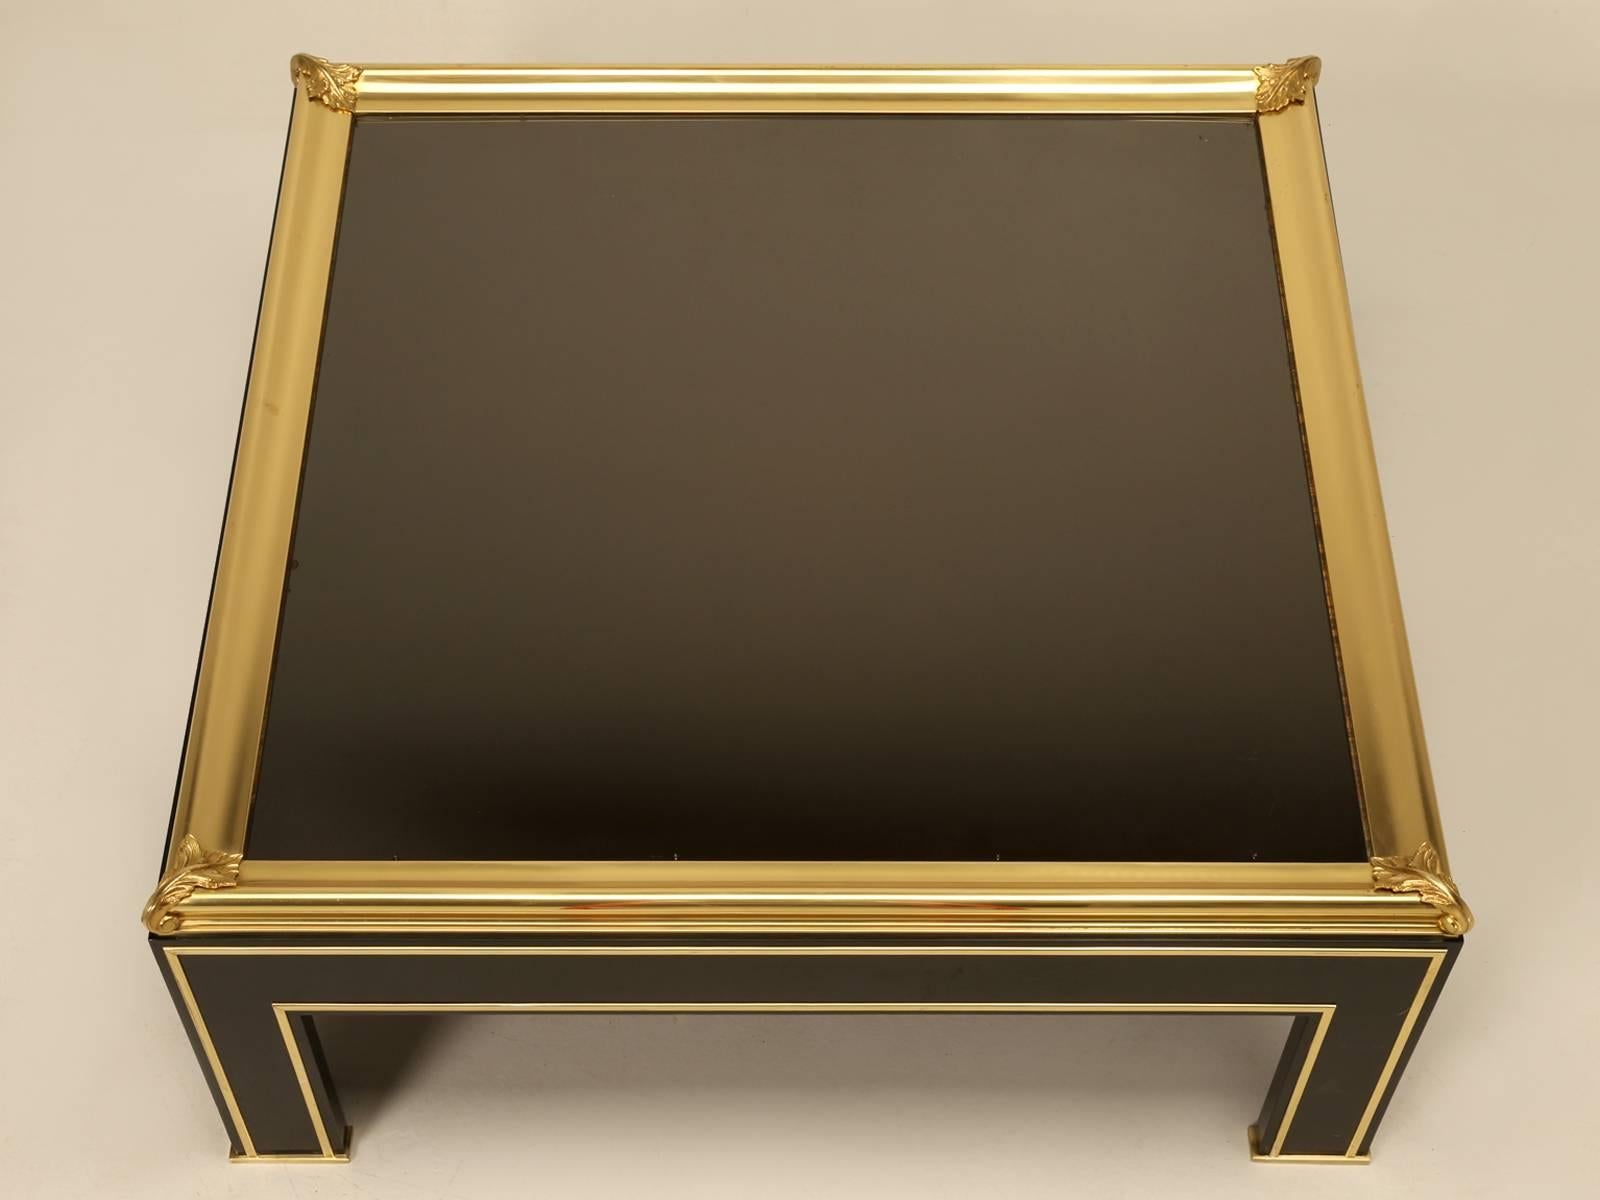 Hand-Crafted French Coffee Table Style of Maison Jansen Black Glass, Lacquer with Brass Trim